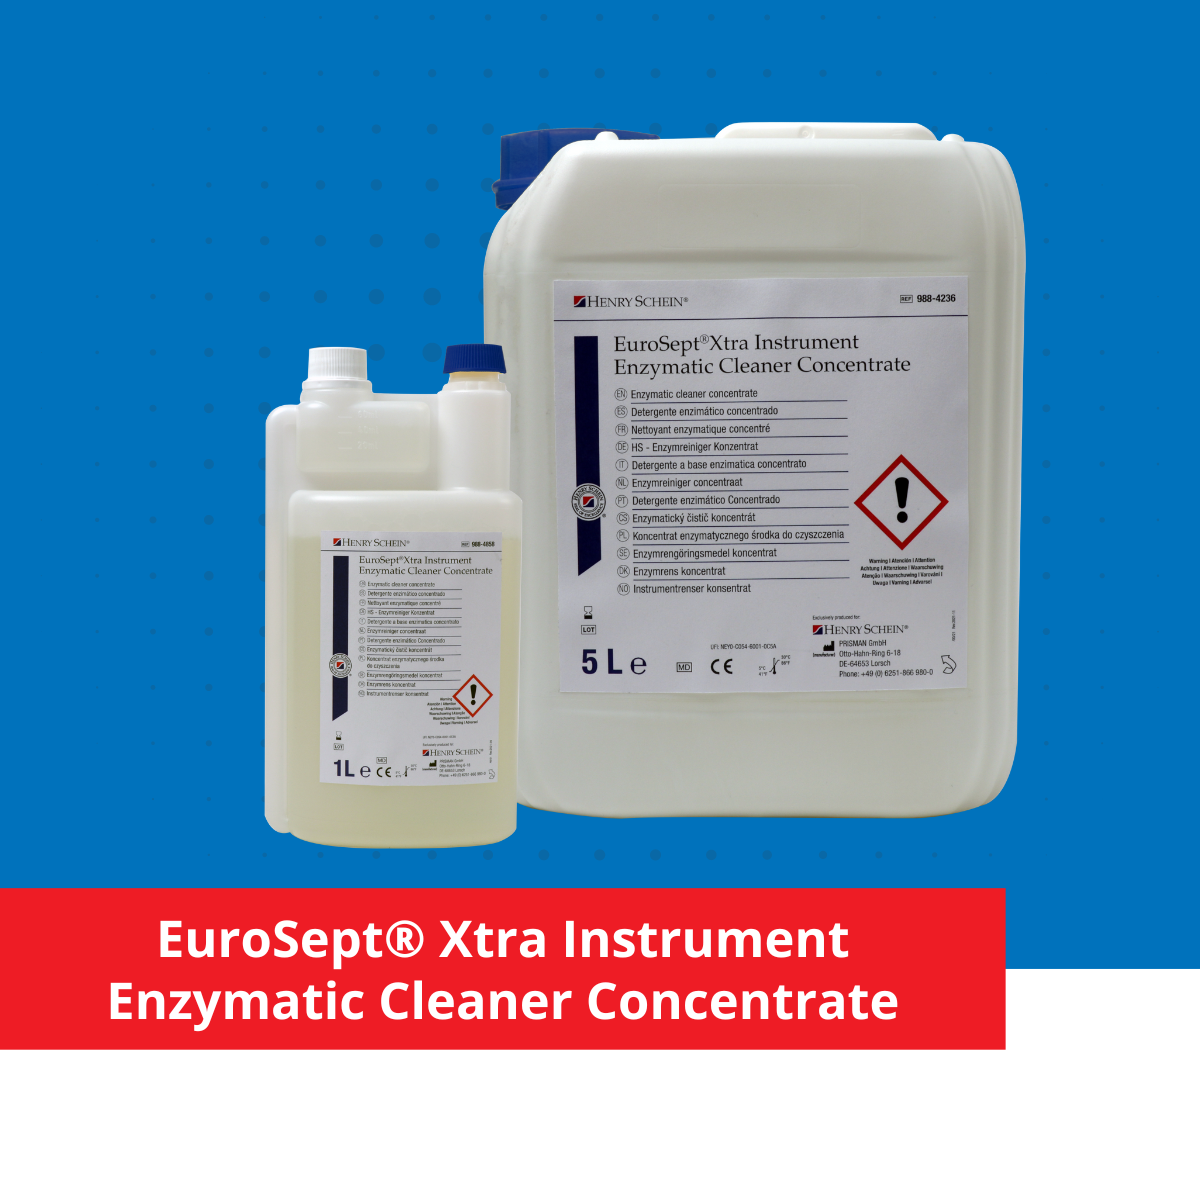 EuroSept Xtra Instrument Enzymatic Cleaner Concentrate